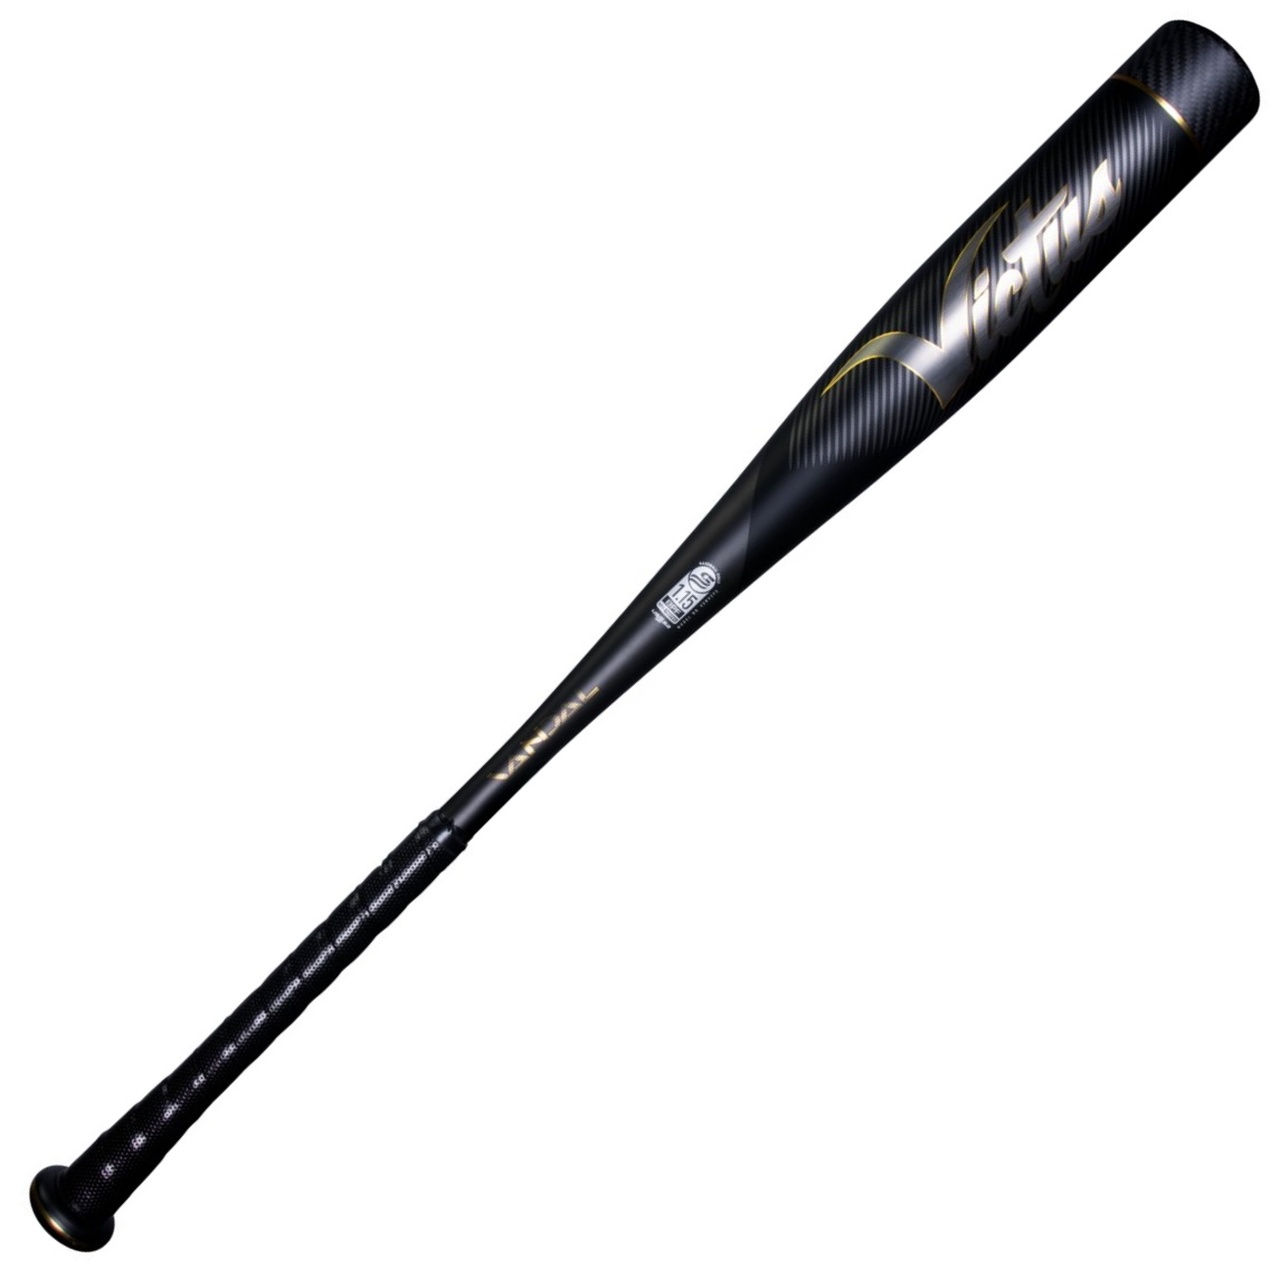 victus-vandal-2-3-baseball-bat-31-inch-28-oz VCBV2-3128 Victus  <p>In baseball speed is everything.<br /> <br />That’s why Victus designed the